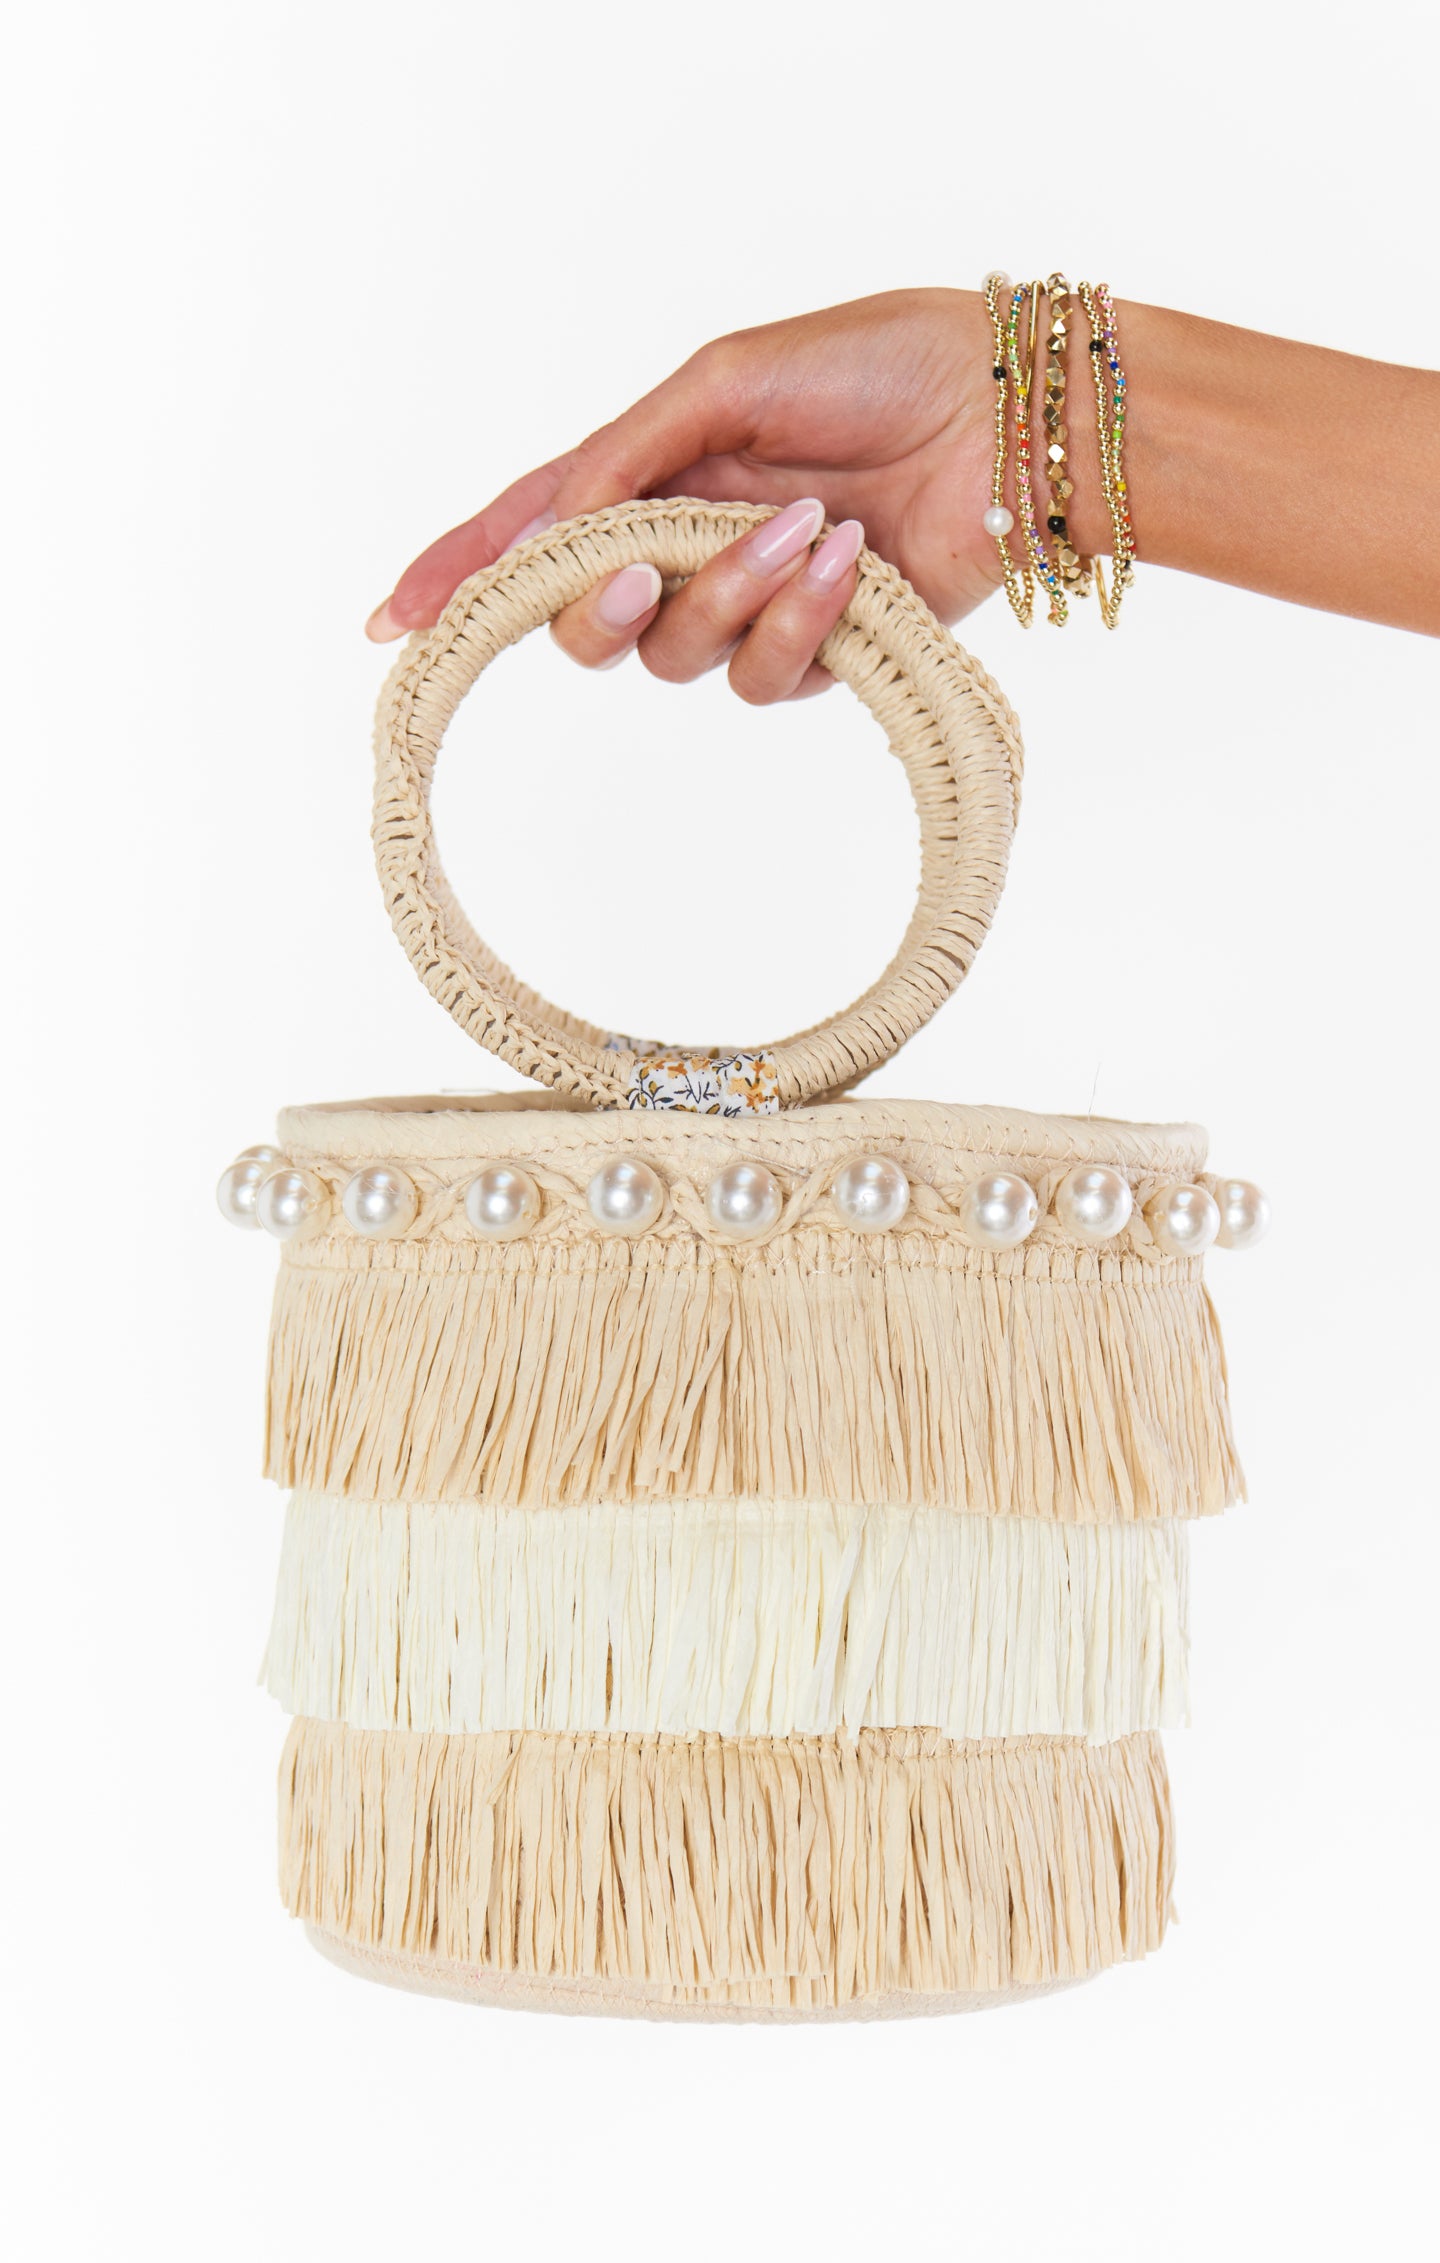 Straw Bags Under $100 That Are the Perfect Honeymoon Accessories